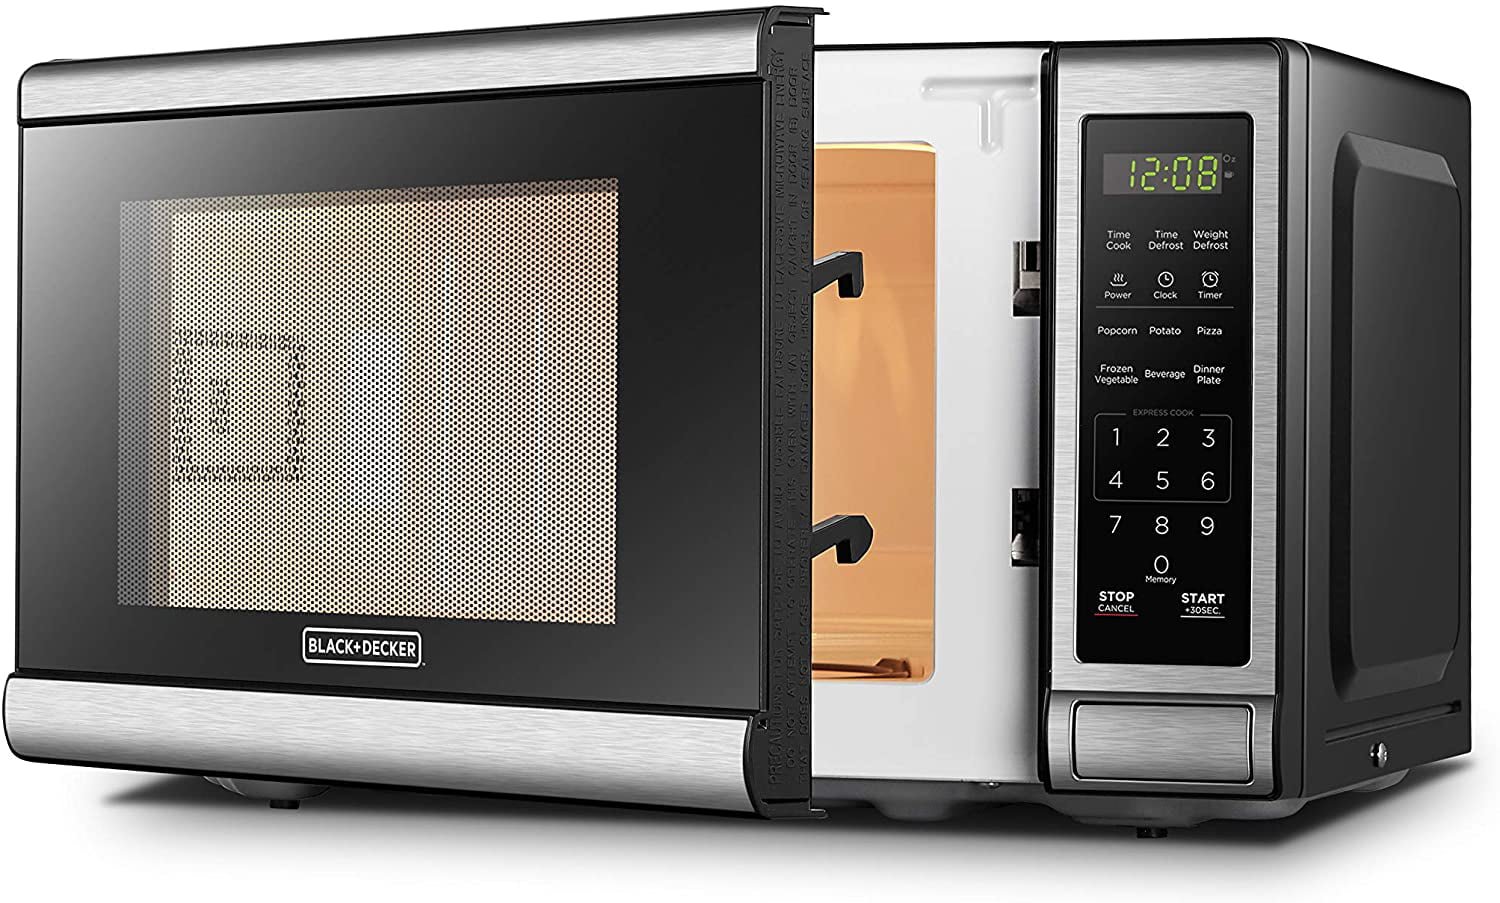 https://themarketdepot.com/wp-content/uploads/2023/01/BLACKDECKER-EM720CB7-Digital-Microwave-Oven-with-Turntable-Push-Button-DoorChild-Safety-Lock700W-Stainless-Steel-0.7-Cu-4.jpeg